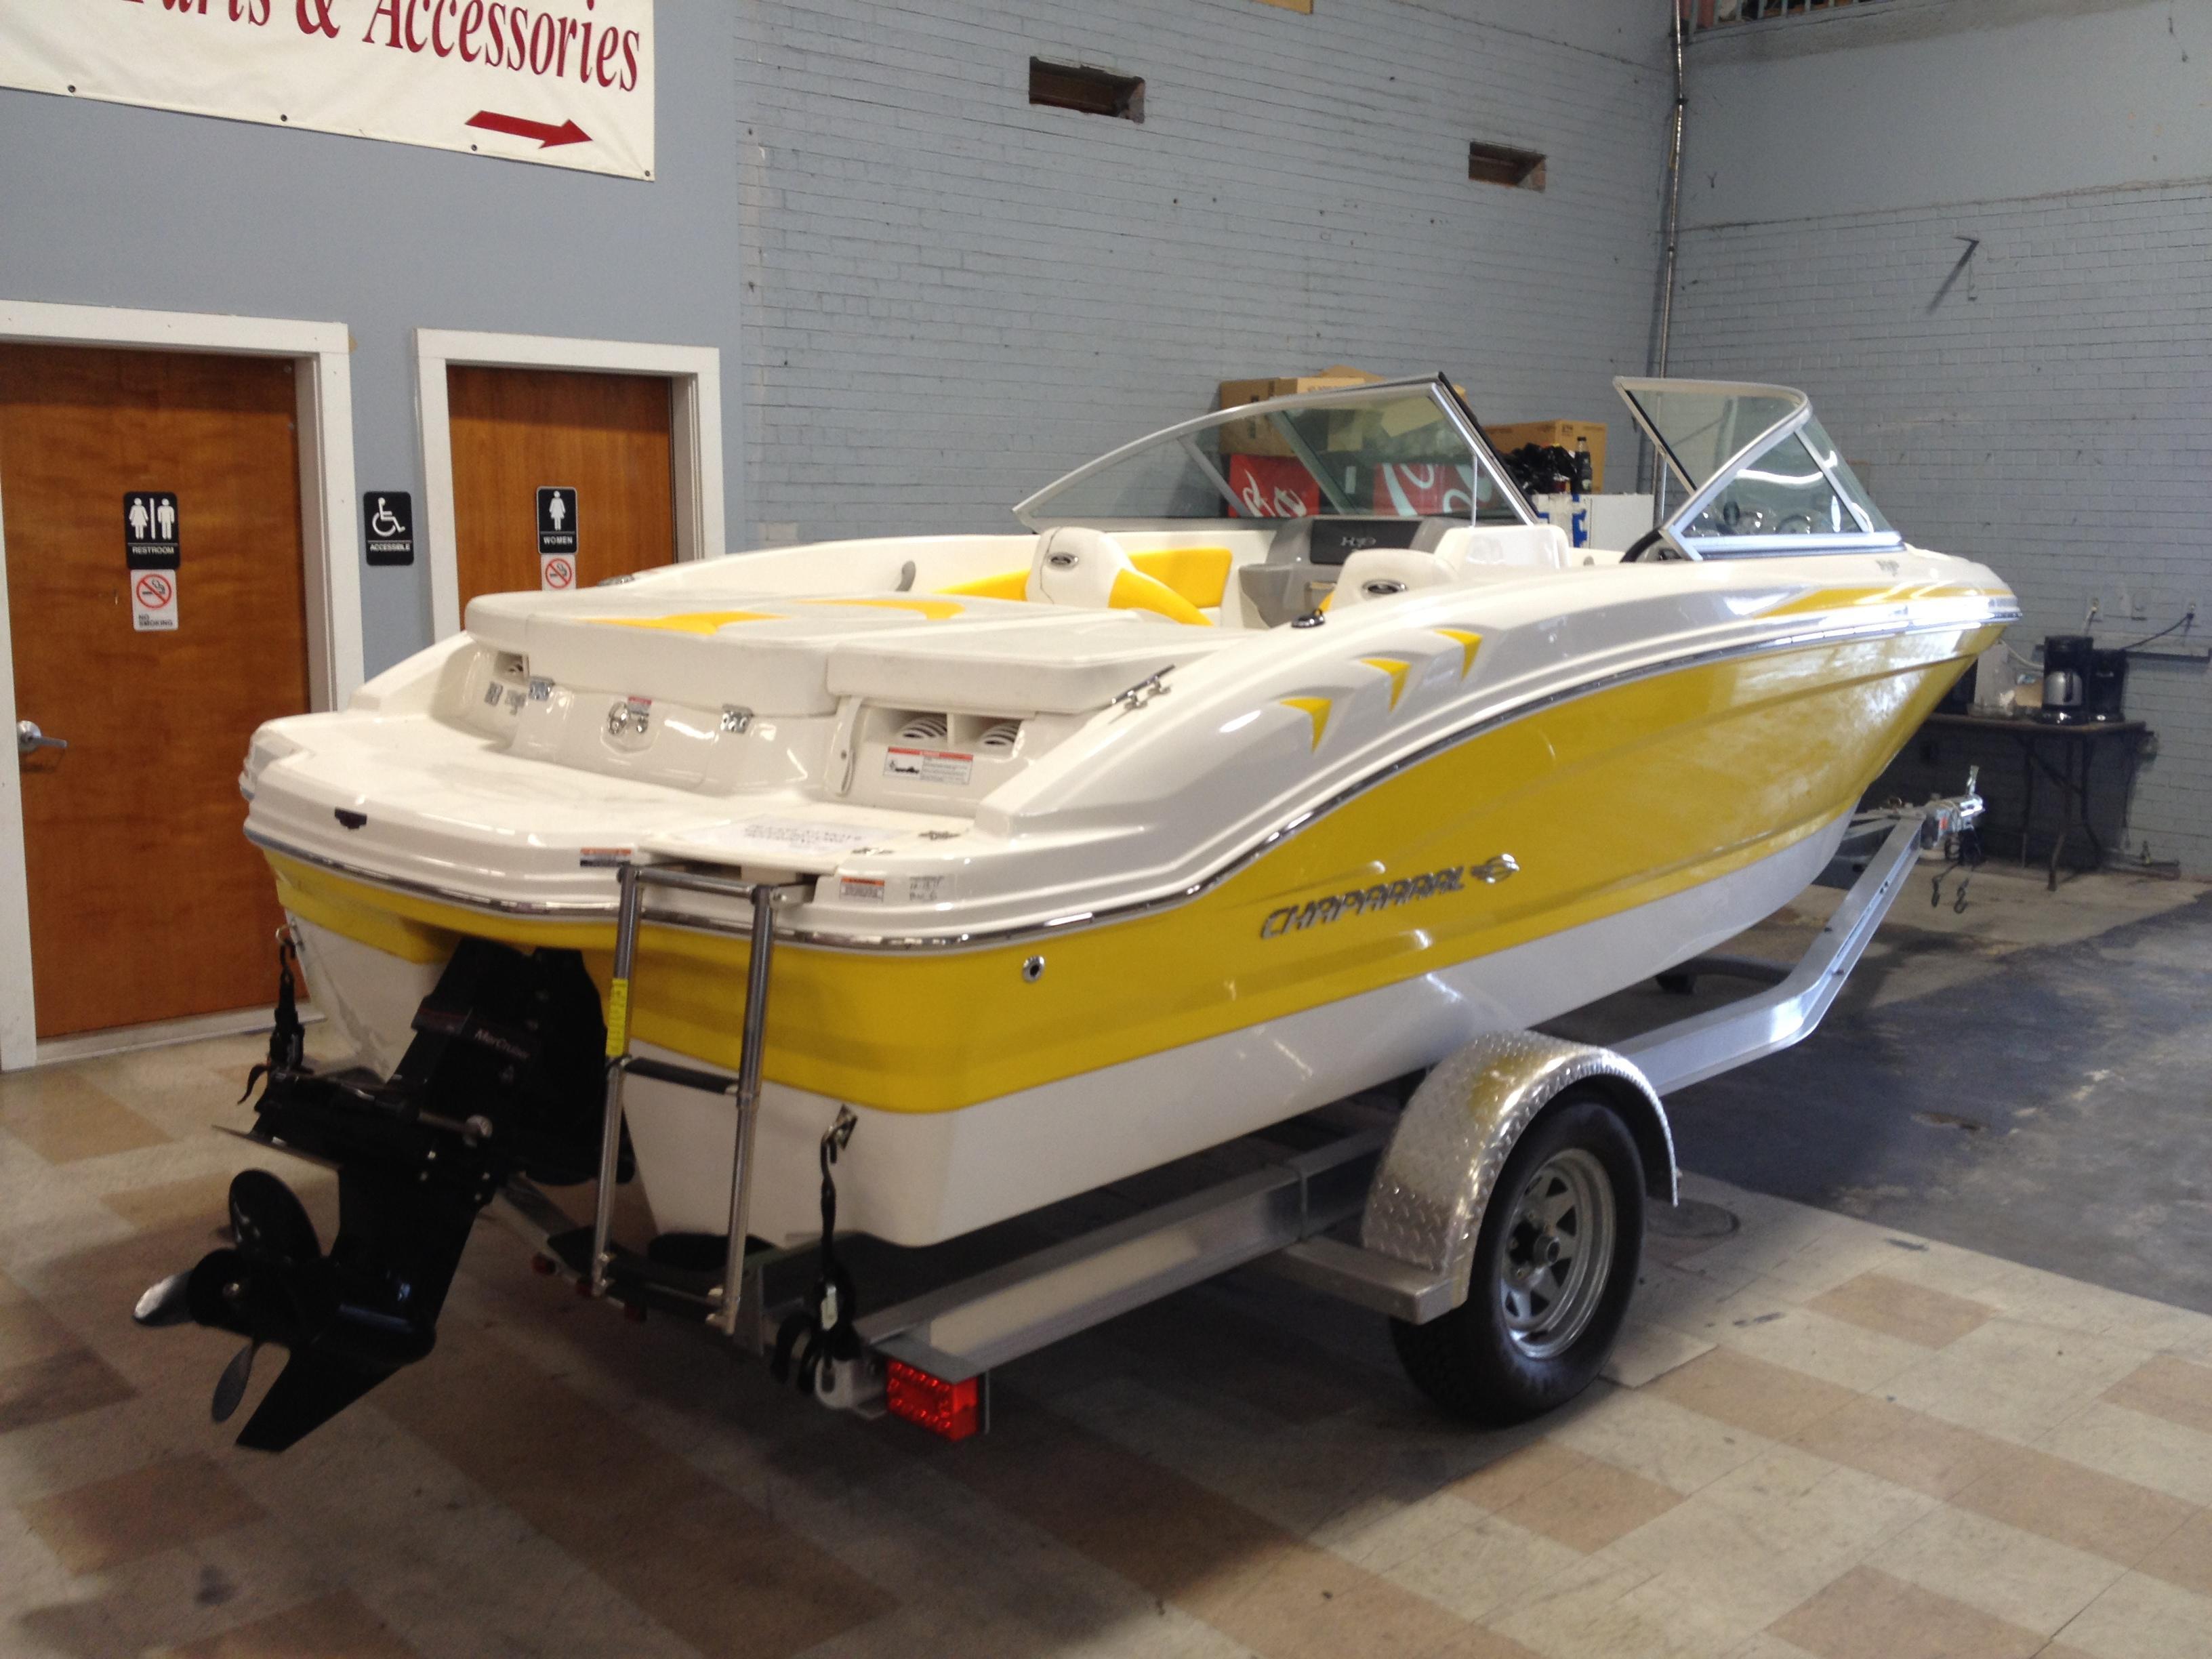 Chaparral 18 Sport H2O, Metairie